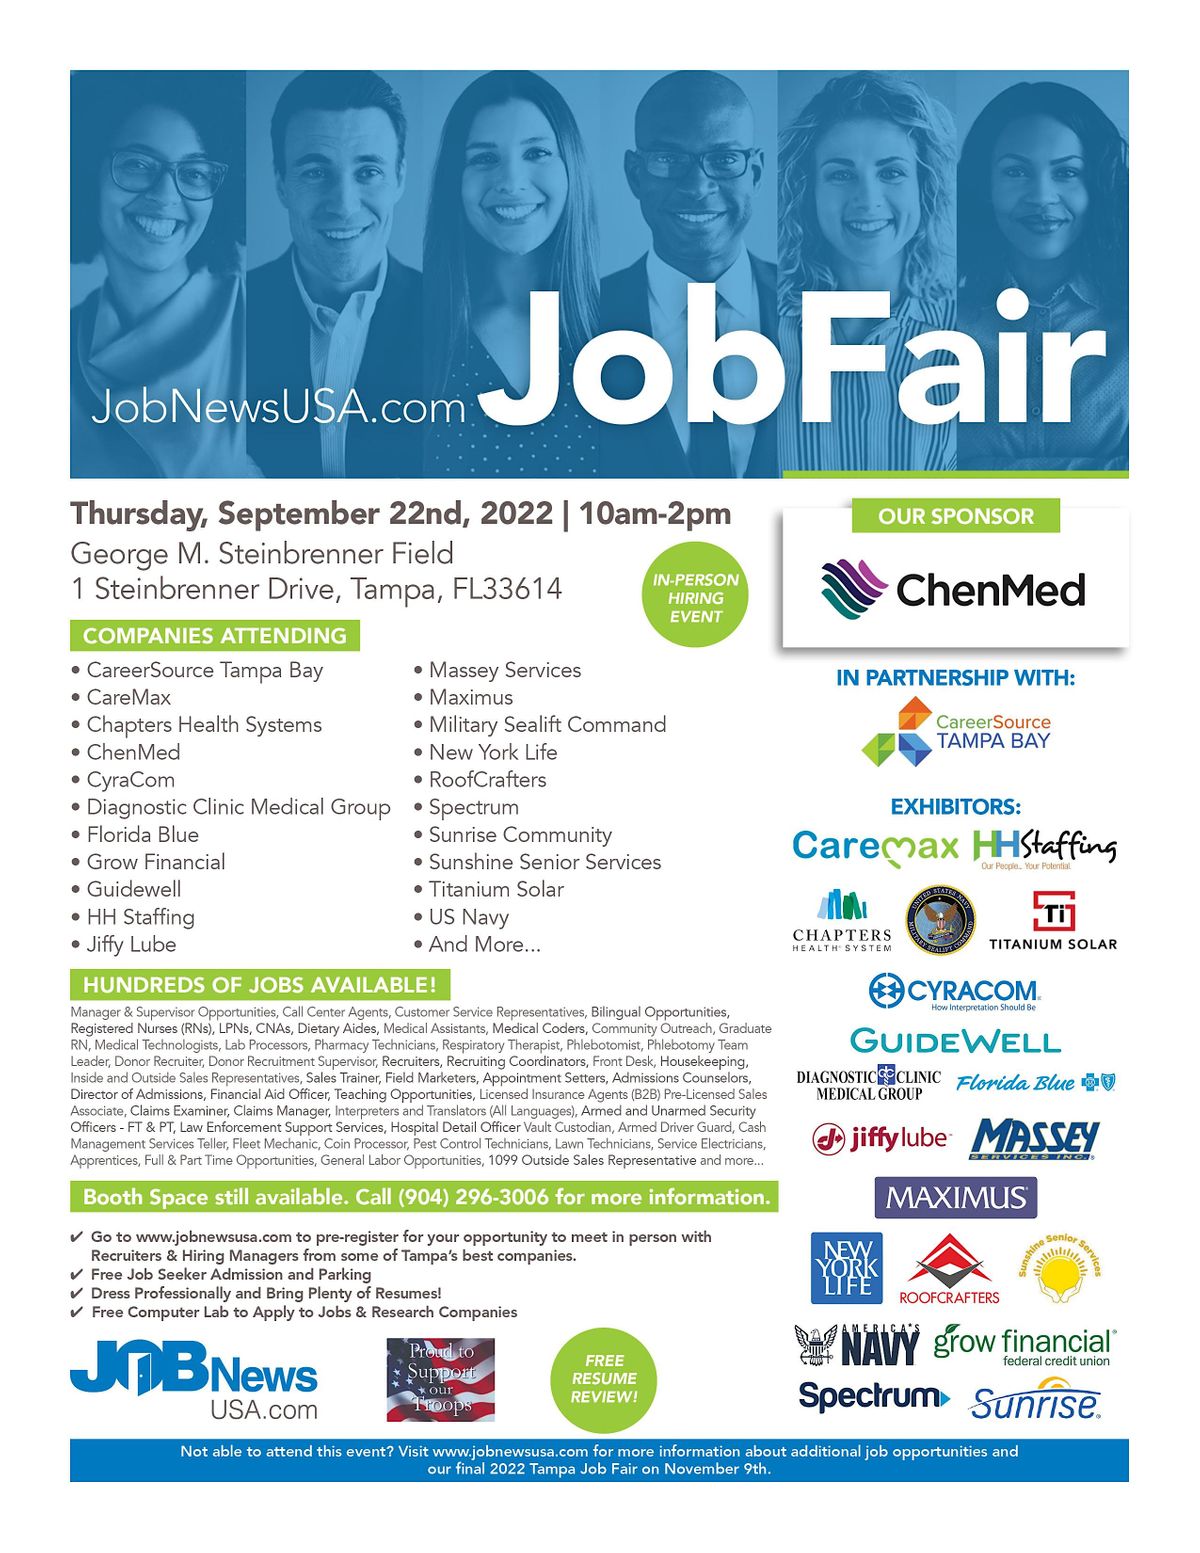 600+ JOBS From 25+ Companies at the September 22nd Tampa Job Fair